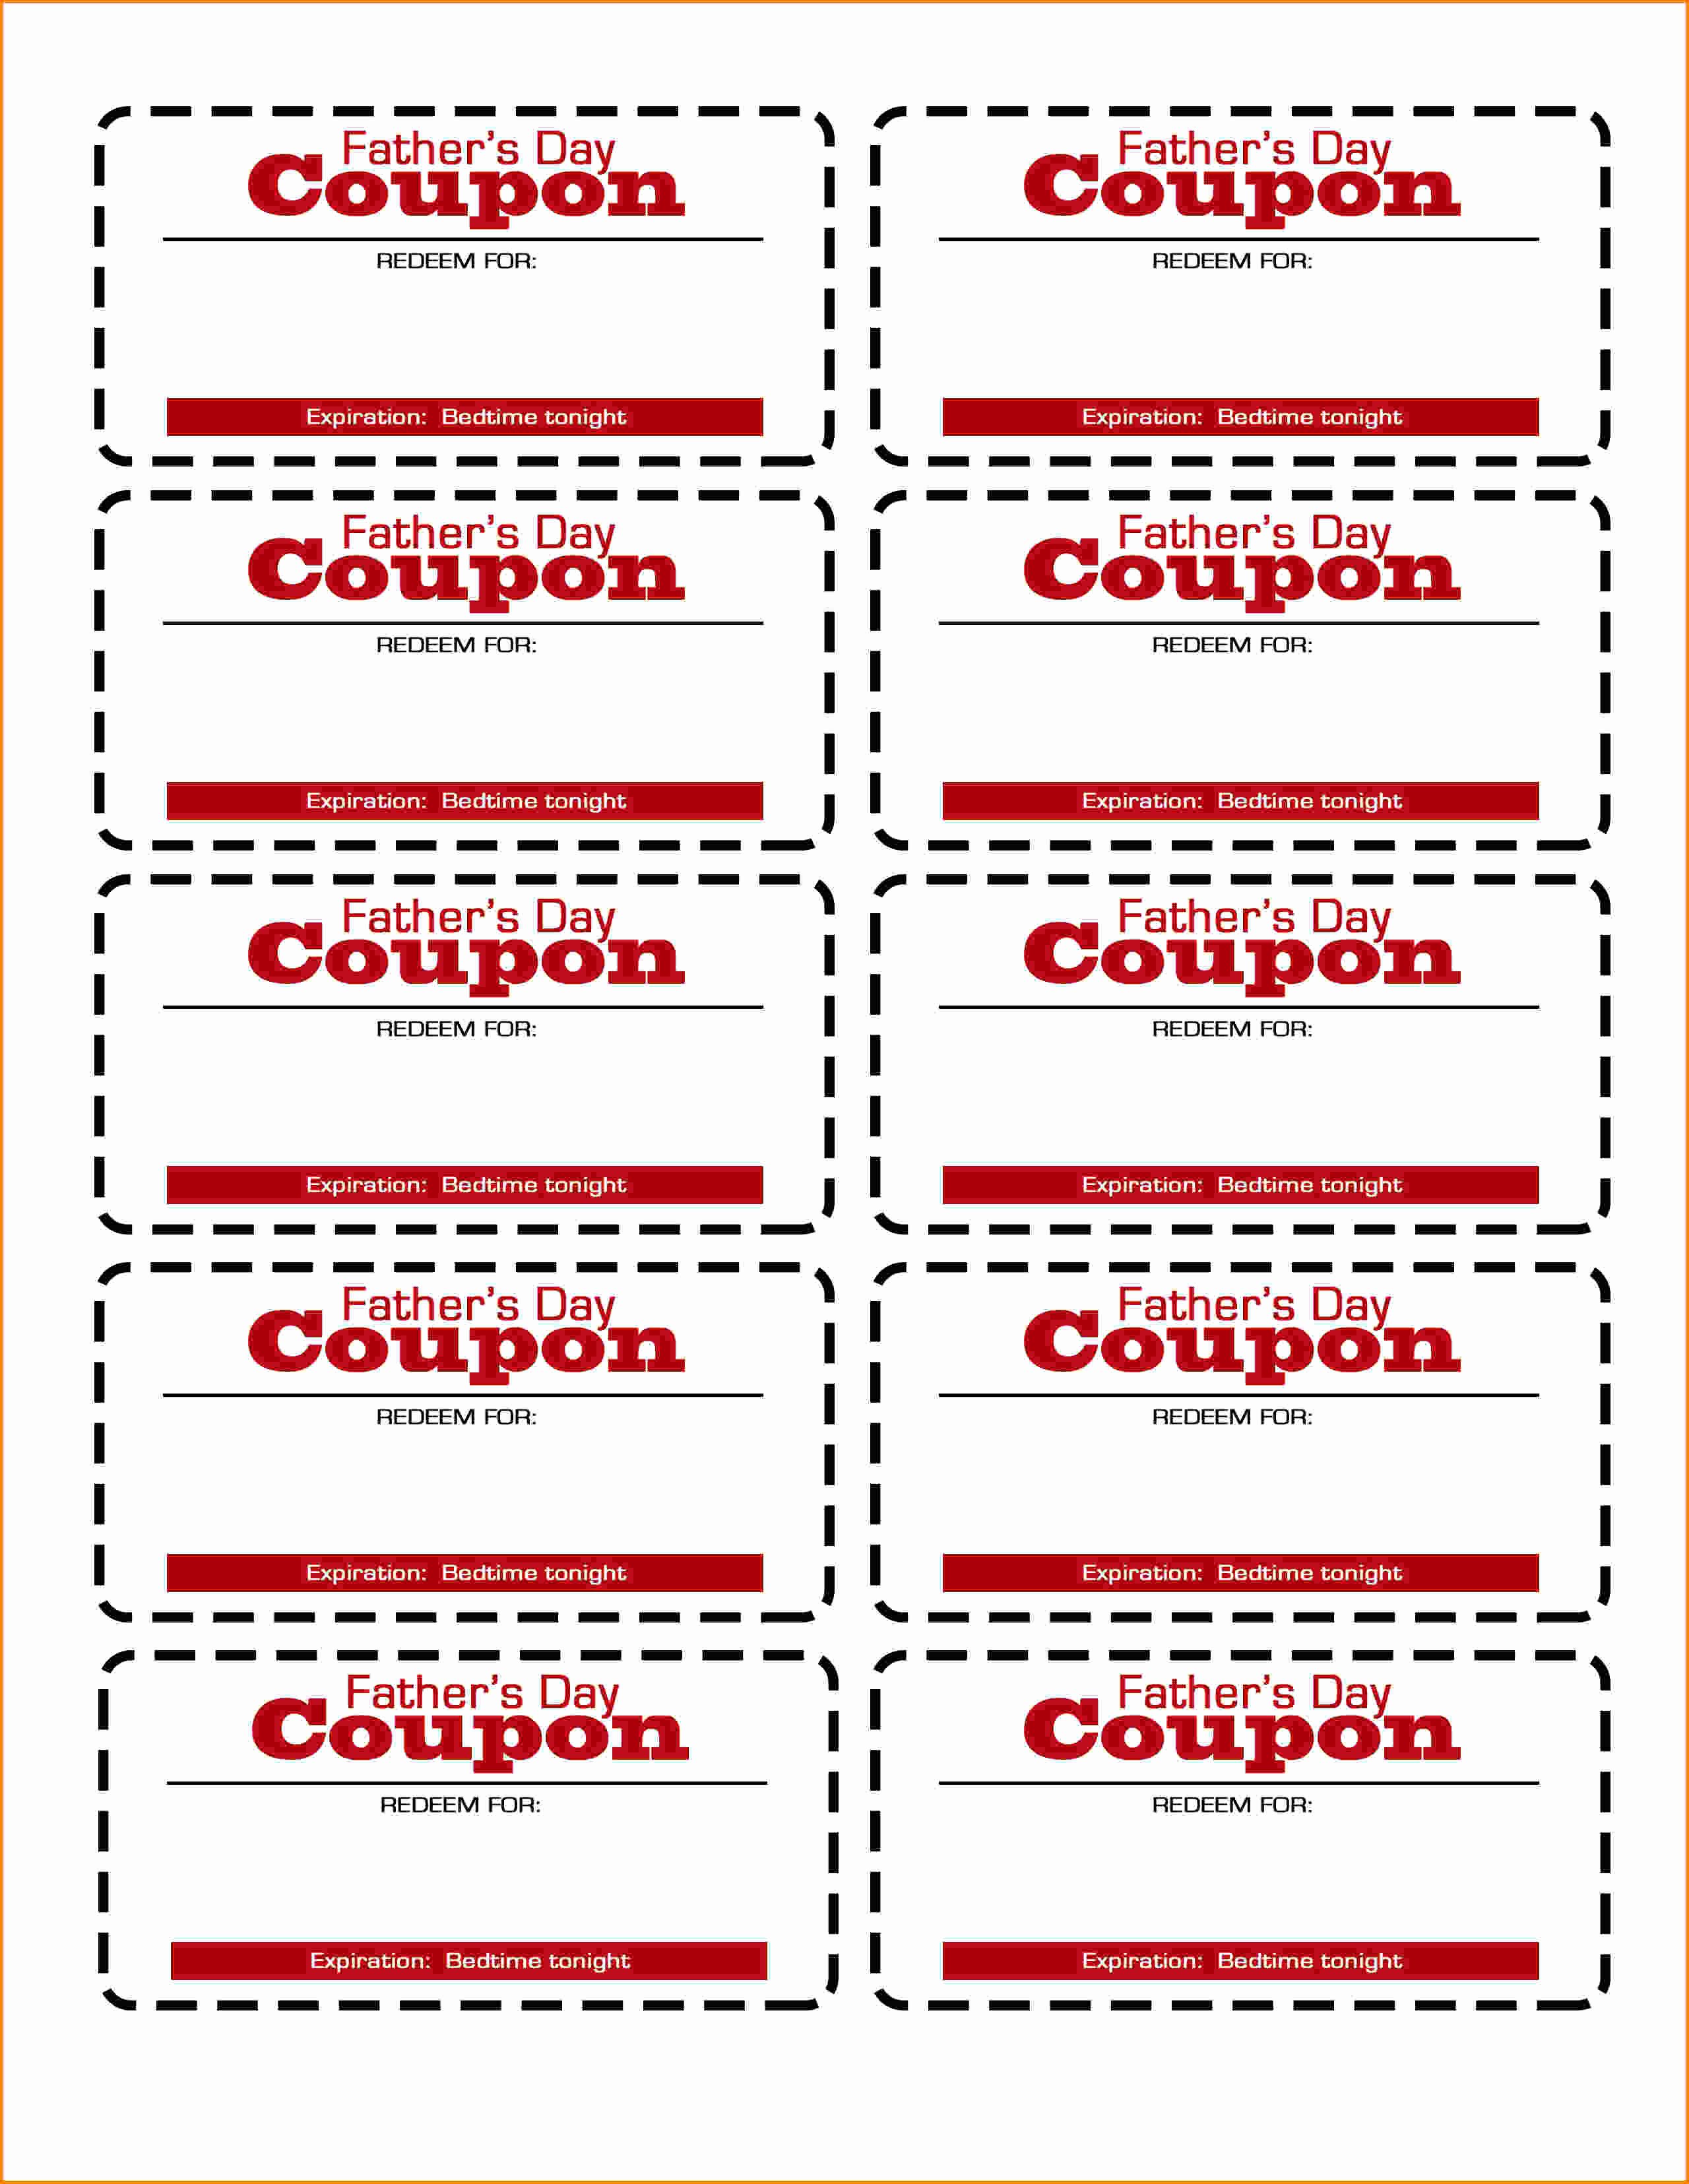 Microsoft Word Coupon Template Lovely Coupon Templates for Word Portablegasgrillweber